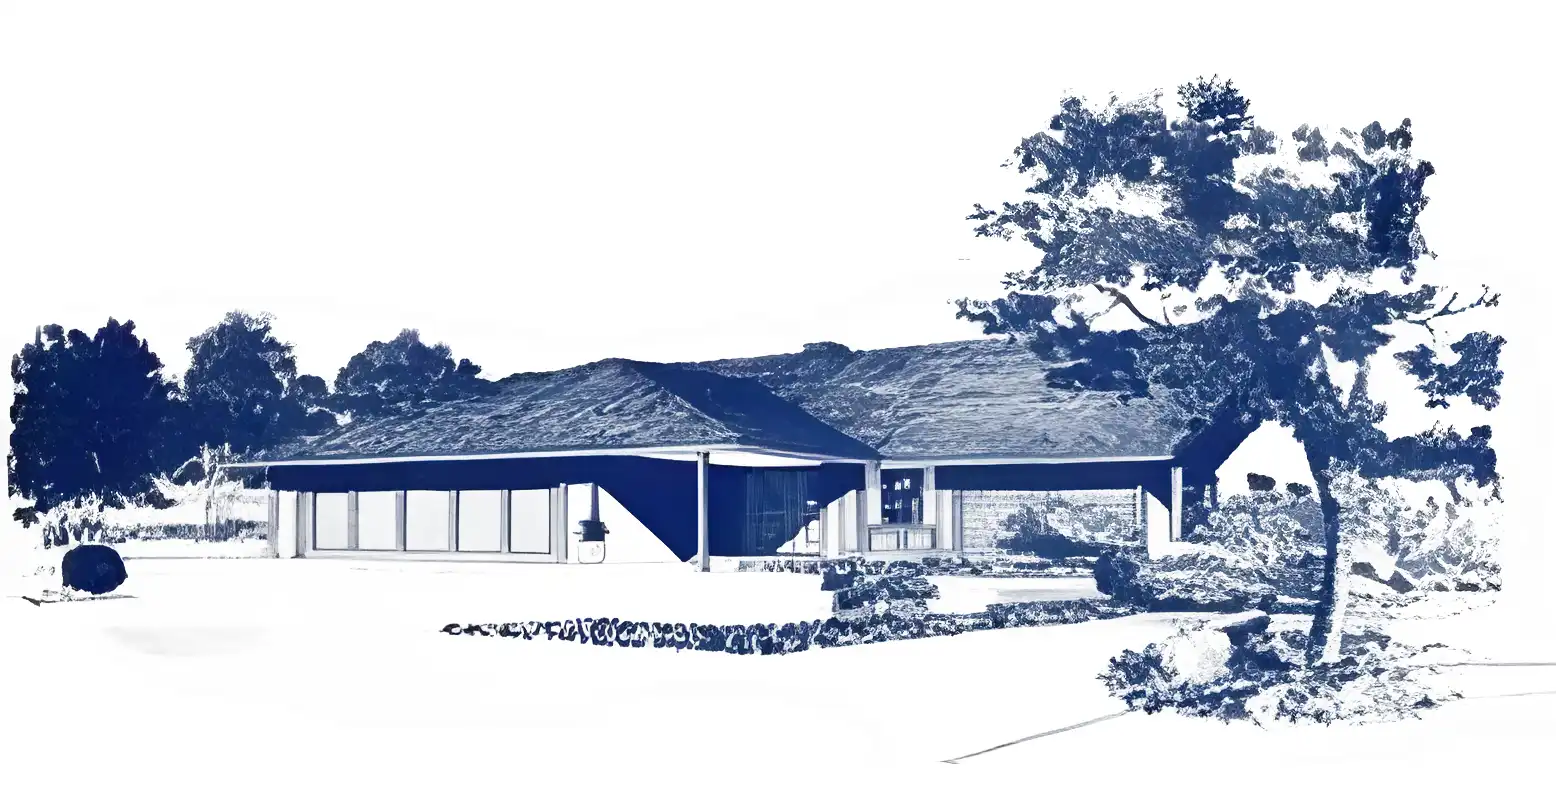 Monochrome rendering of 1960s ranch style house, variant with hip roofs.